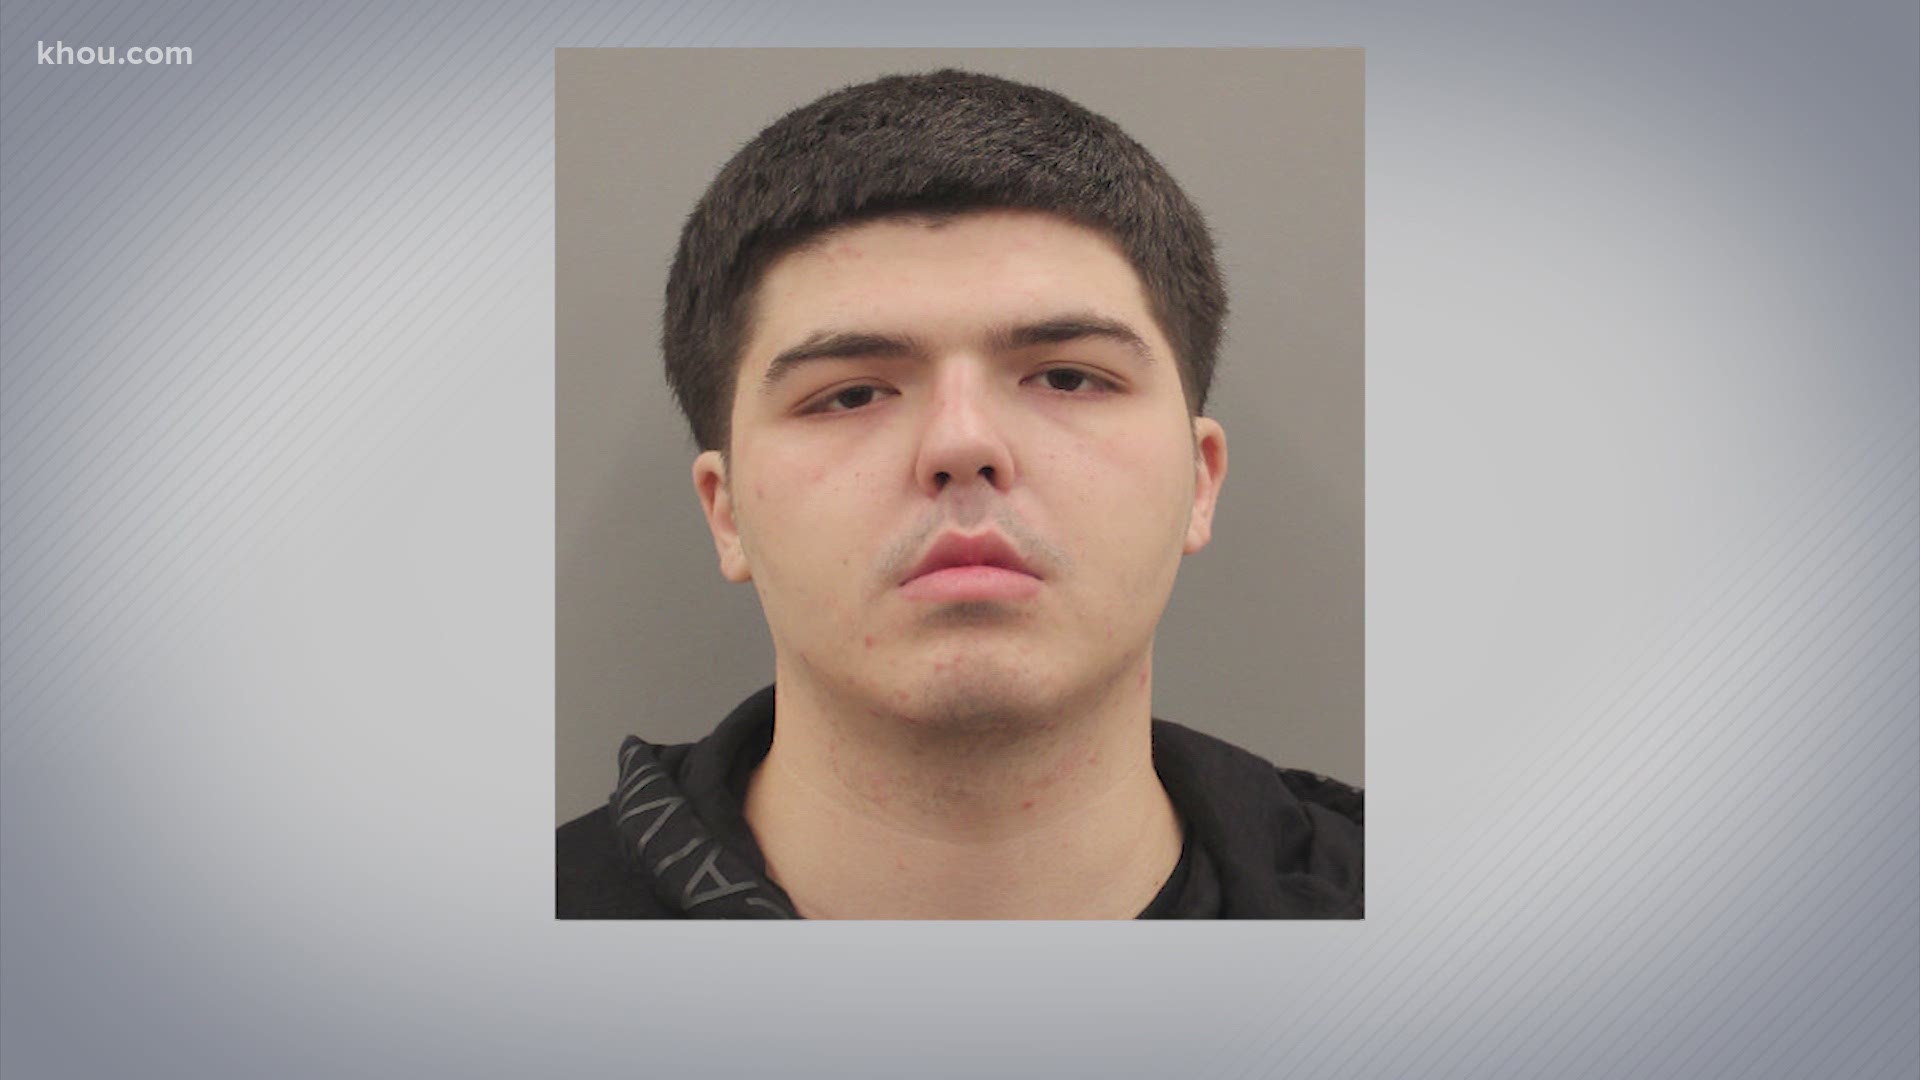 Sheriff Ed Gonzalez says charges against Mann Austin Hayes, 21, are being upgraded to murder.